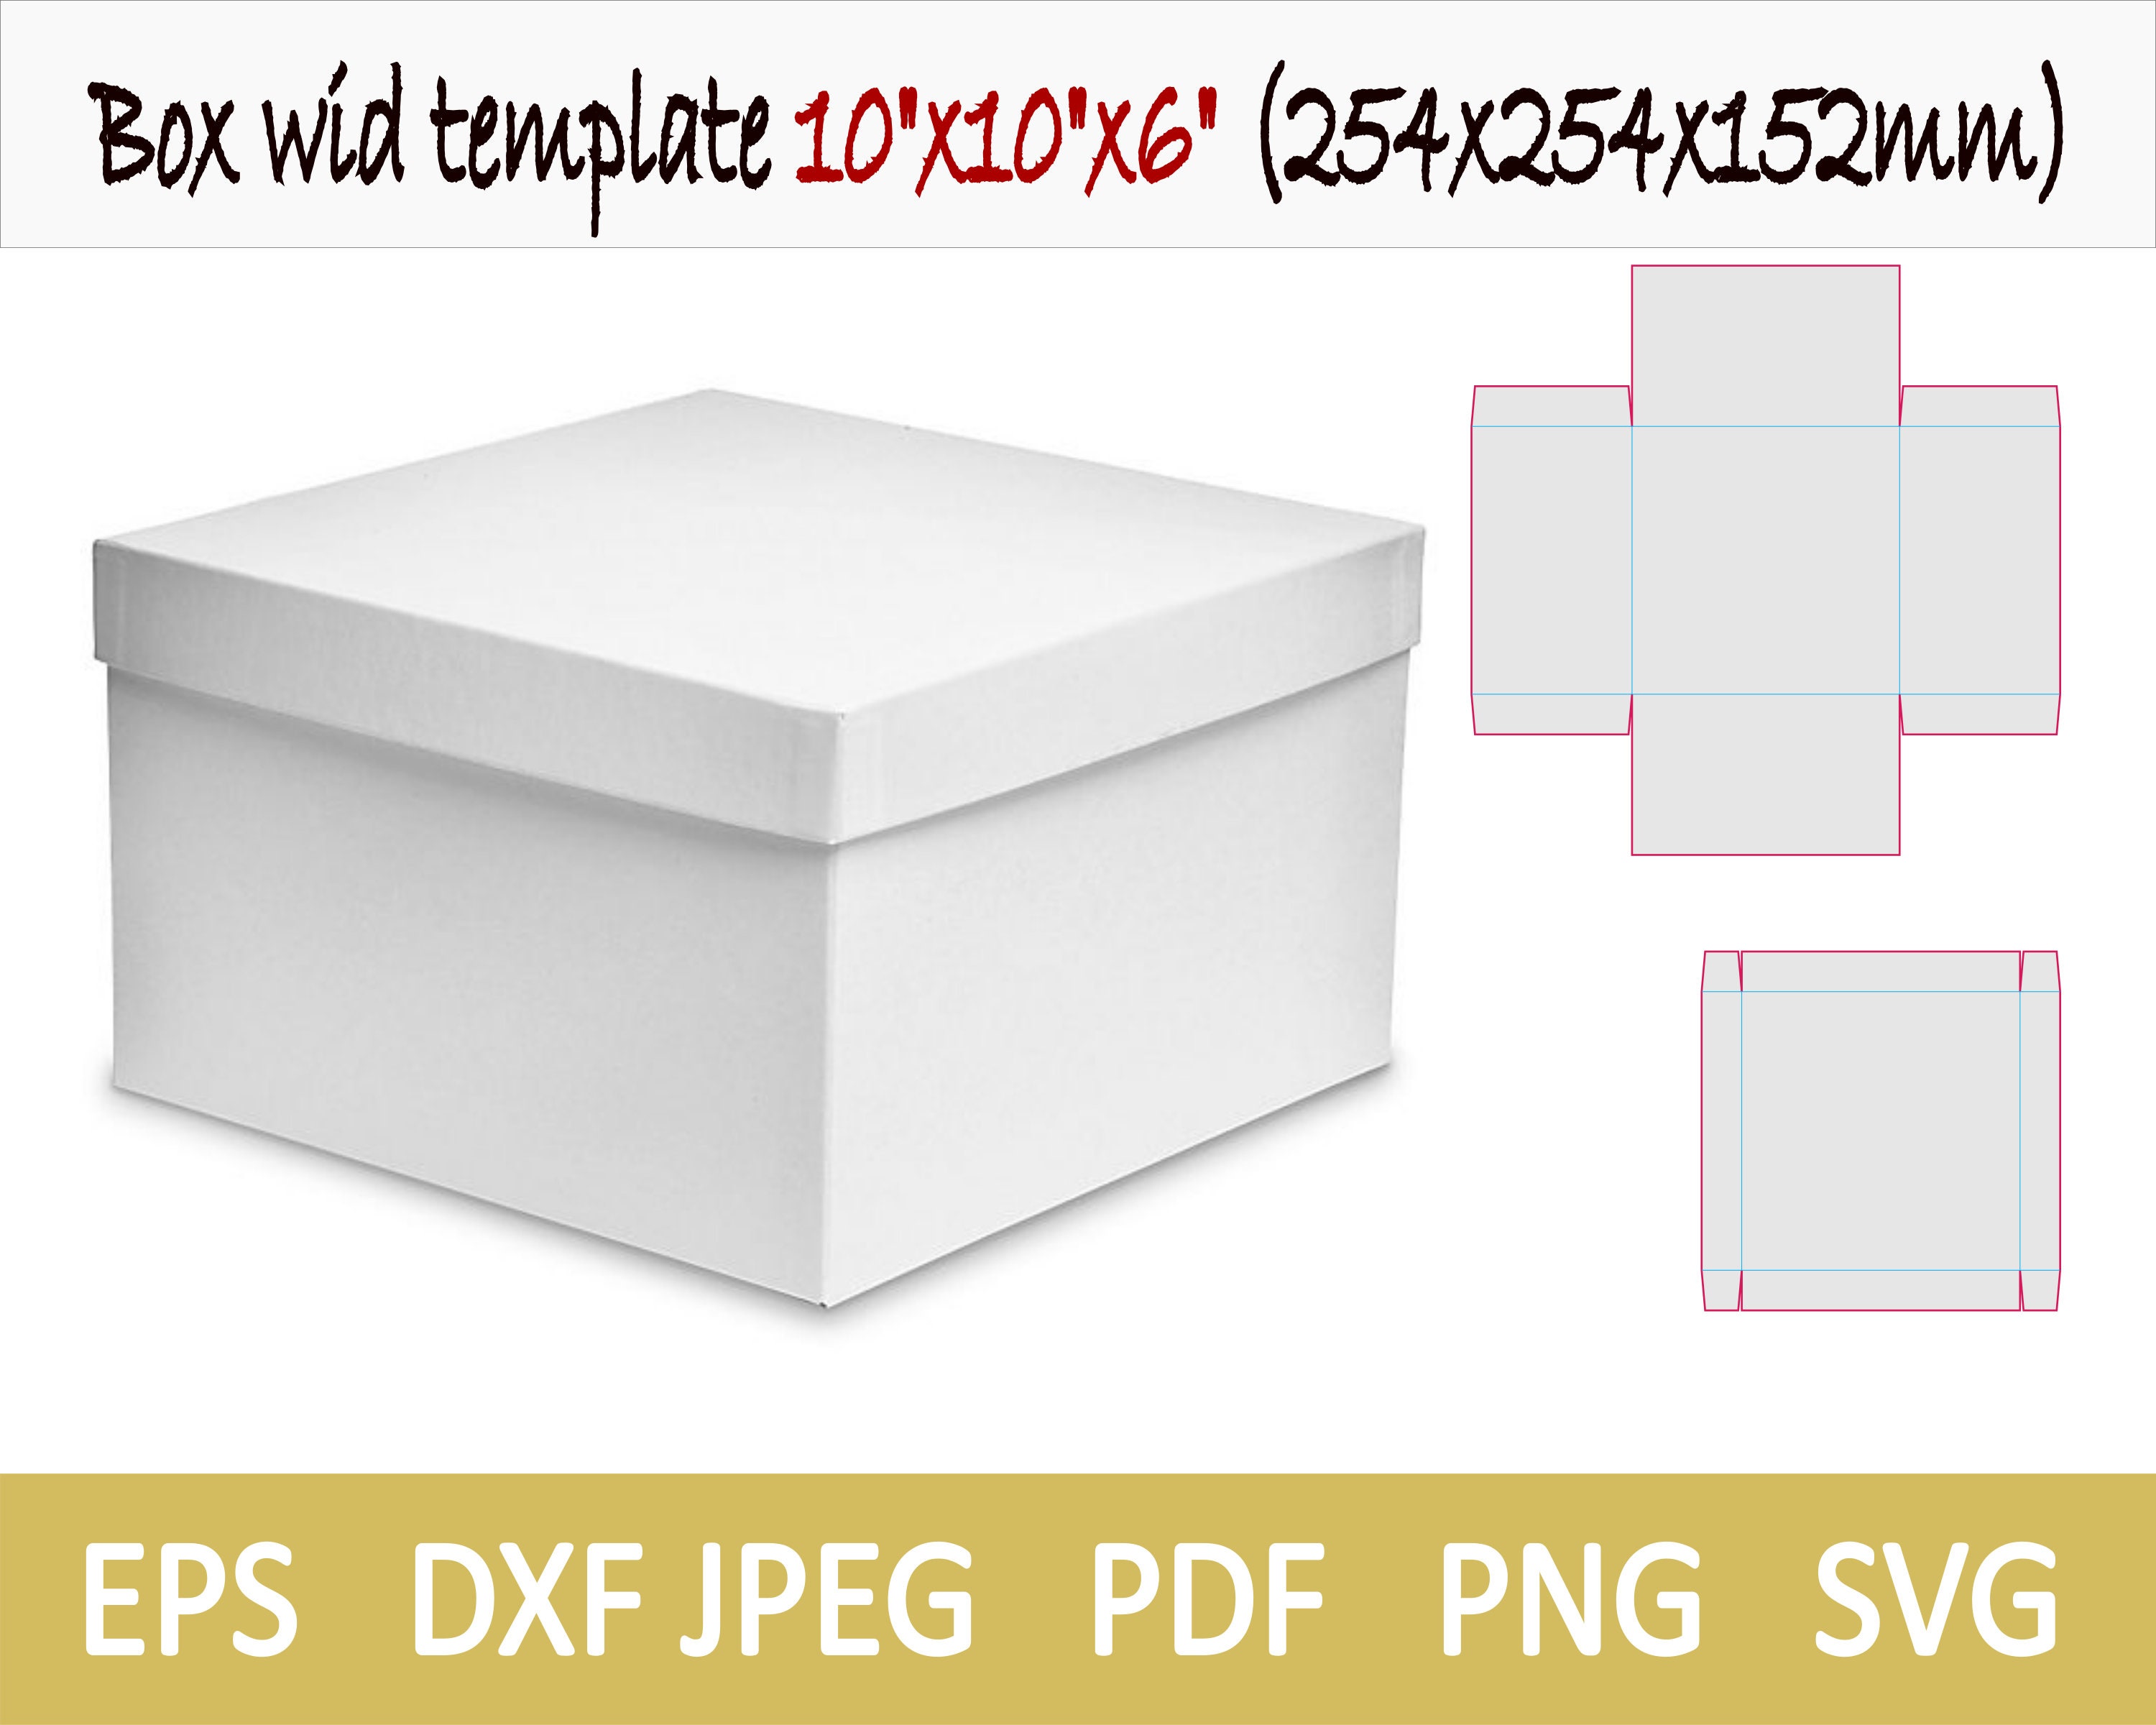 New Document Template: Basic Square Box with Flap Lid - Pazzles Craft Room